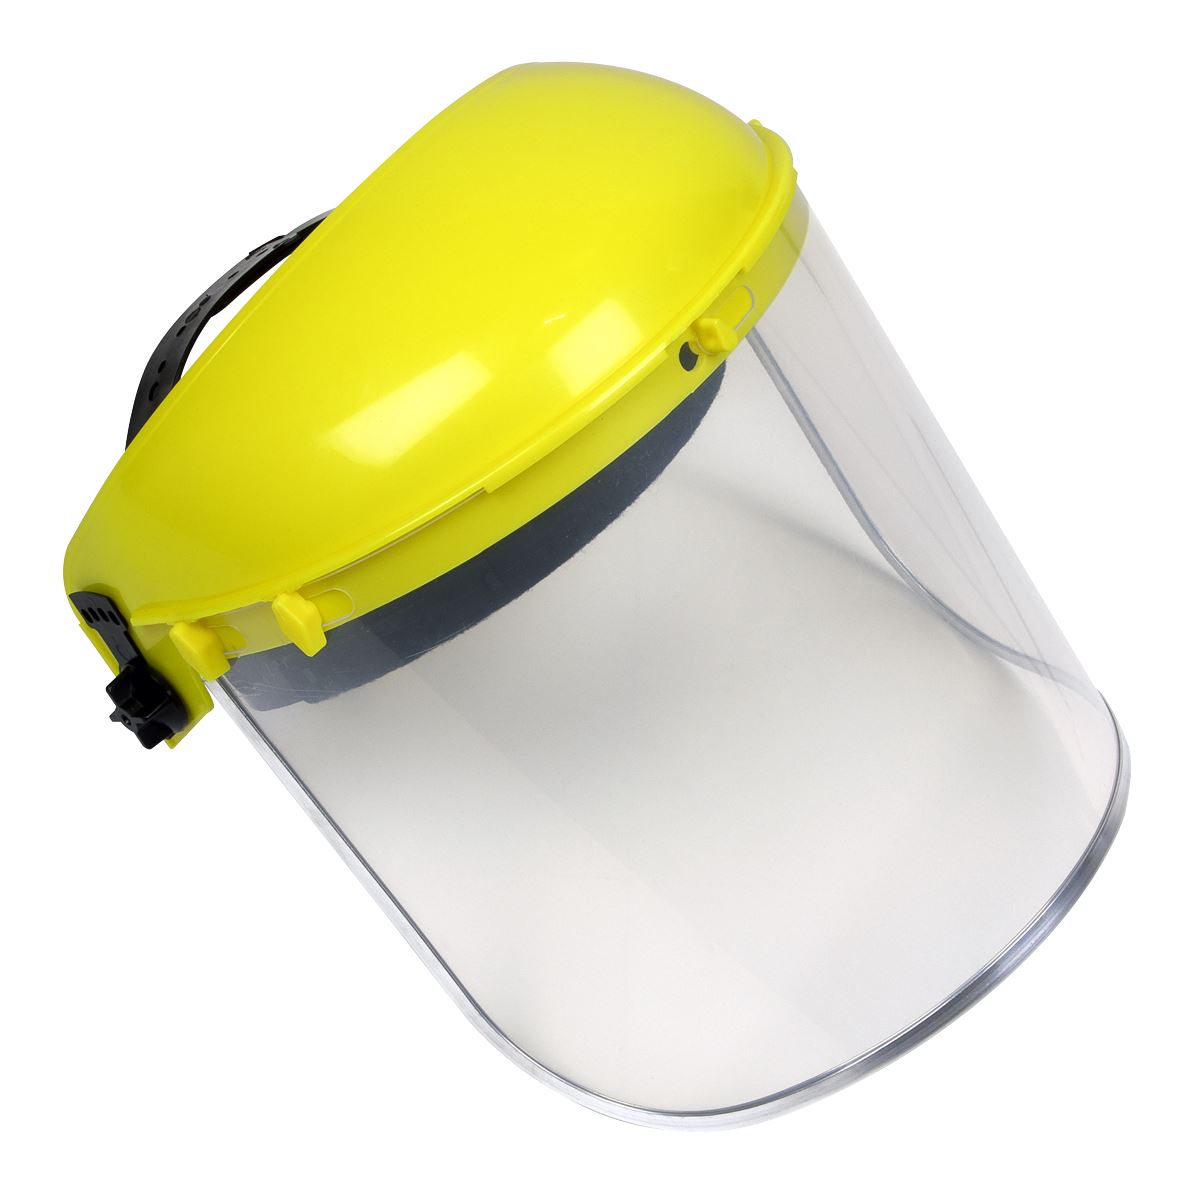 Worksafe by Sealey Brow Guard with Full Face Shield